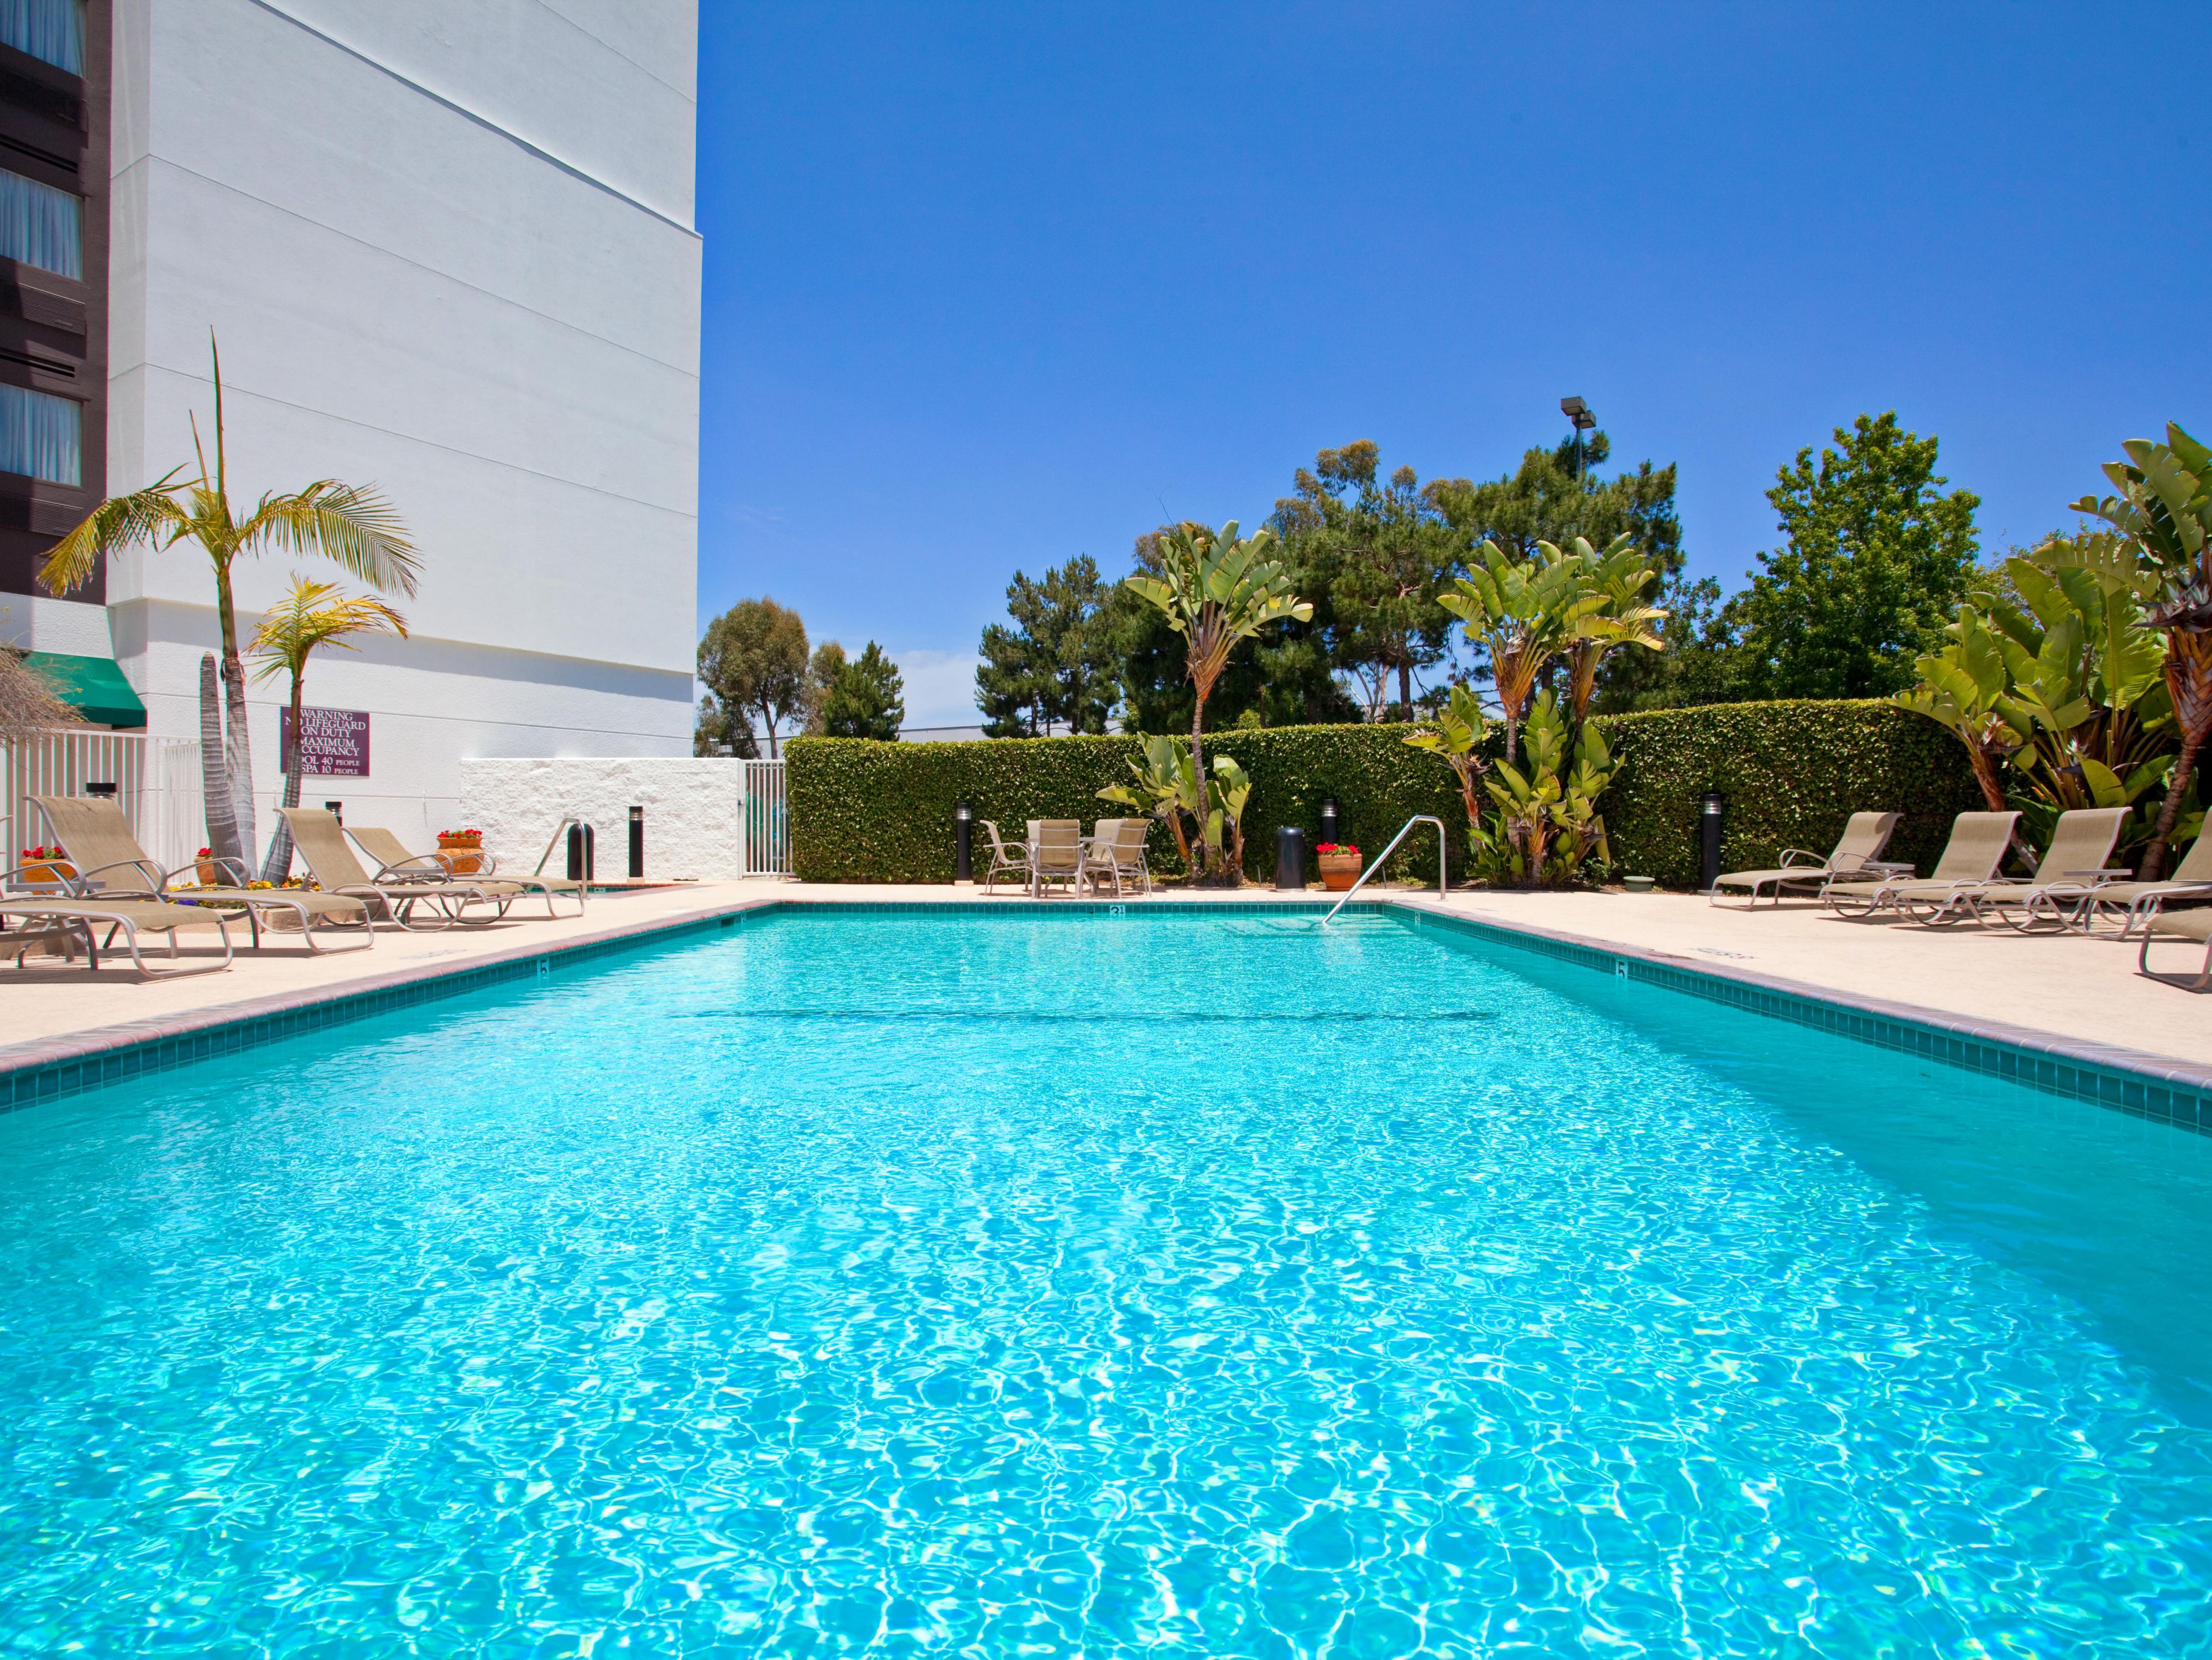 While your here with us relax poolside or enjoy a swim in the heated pool and hot tub.